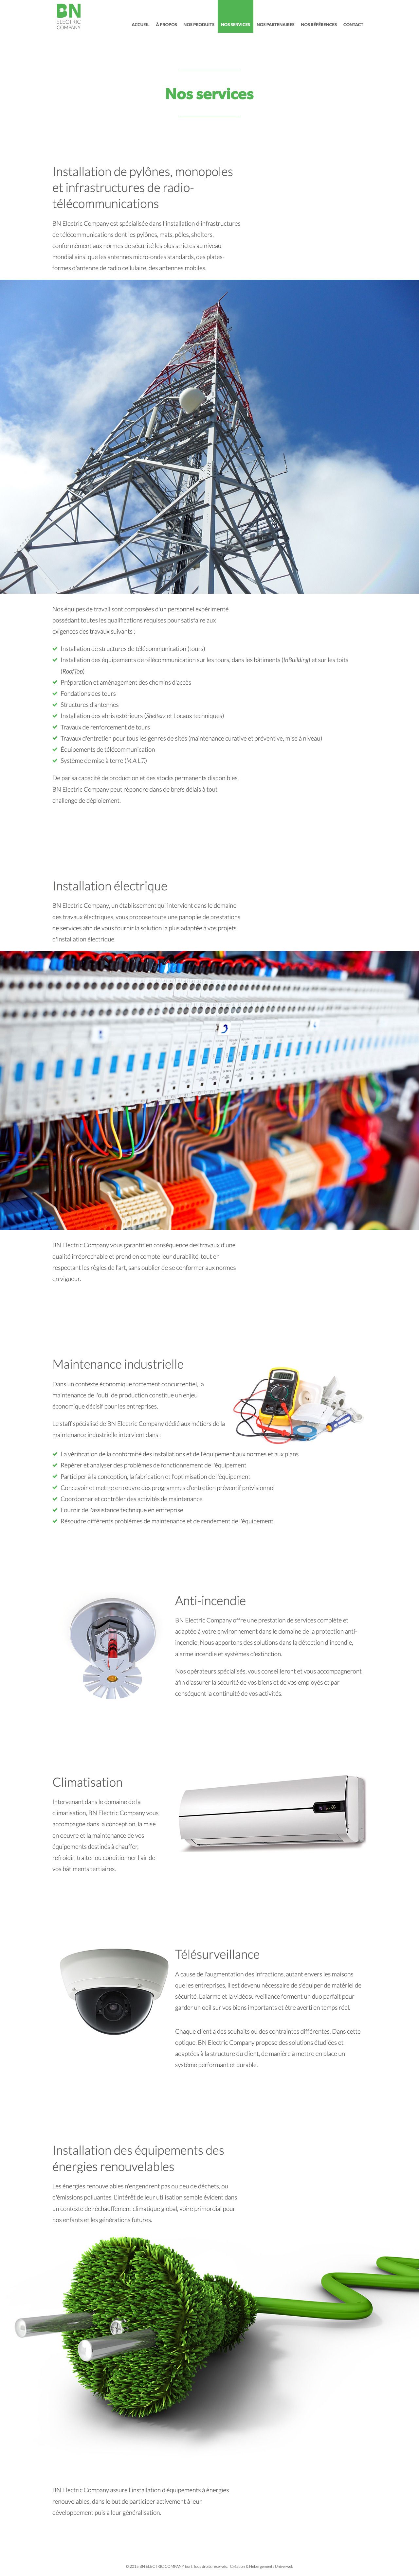 A website overview of BN Electric Company